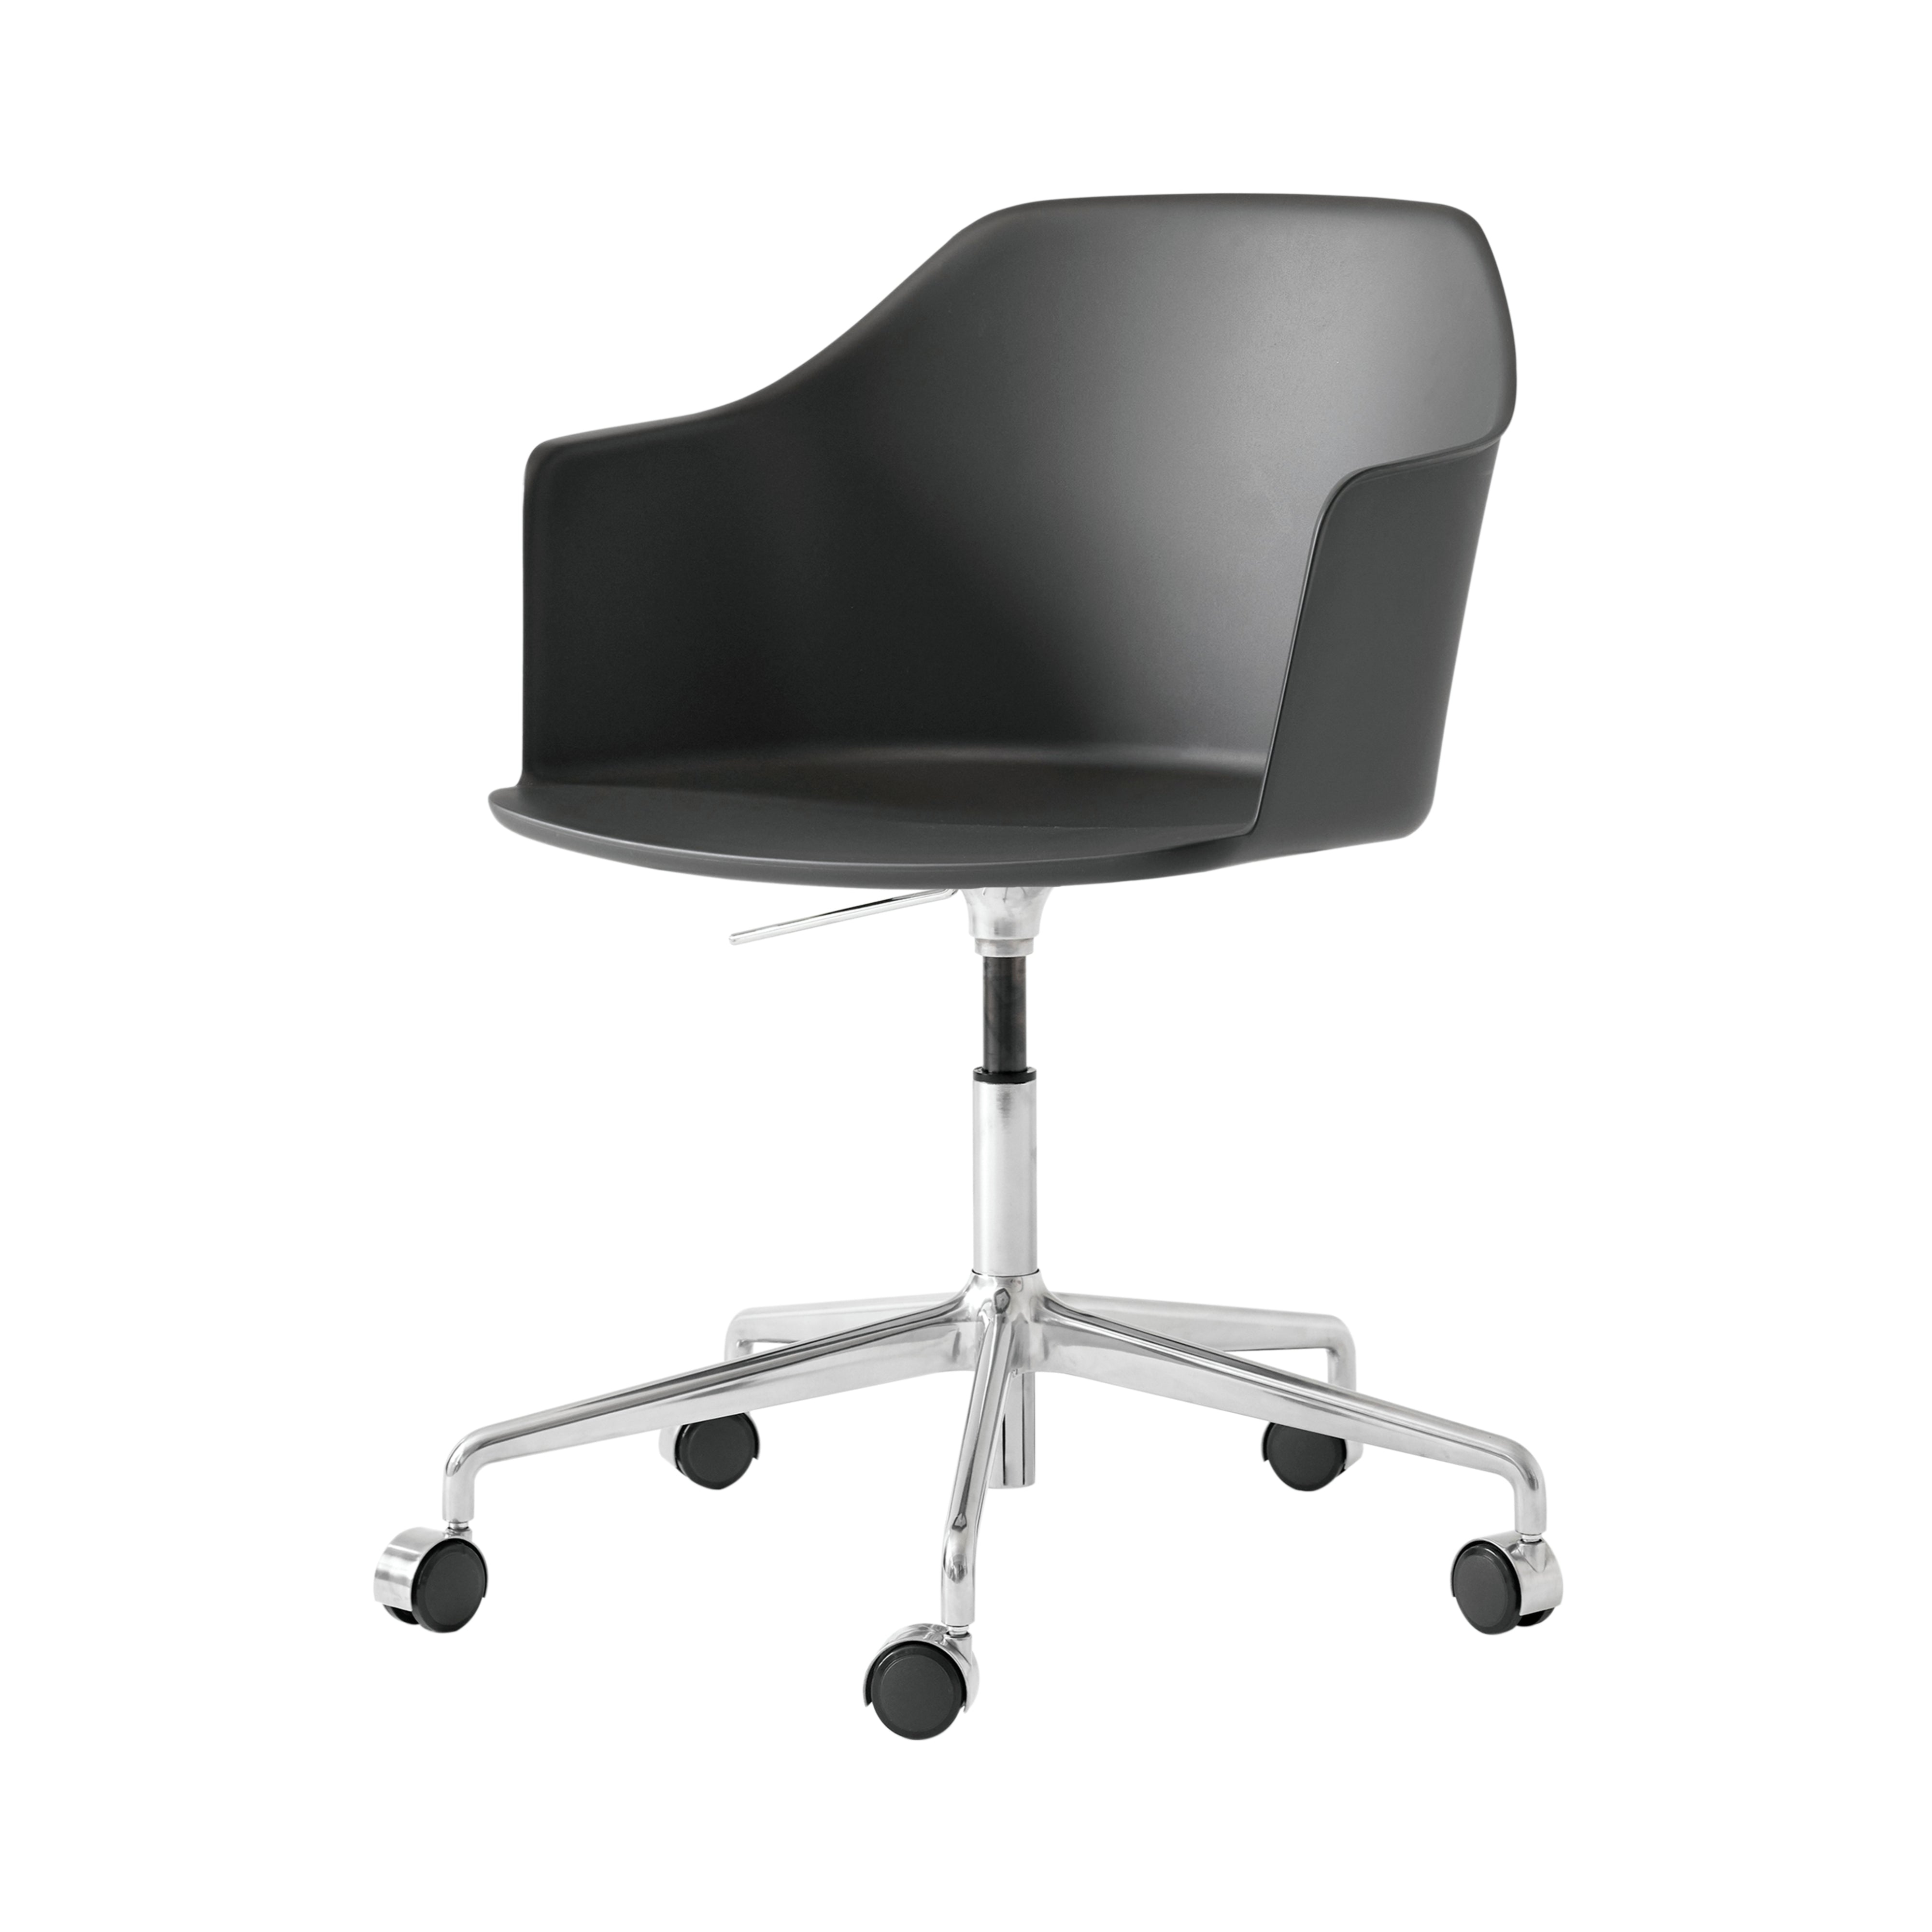 Rely Chair HW53: Black + Polished Aluminum